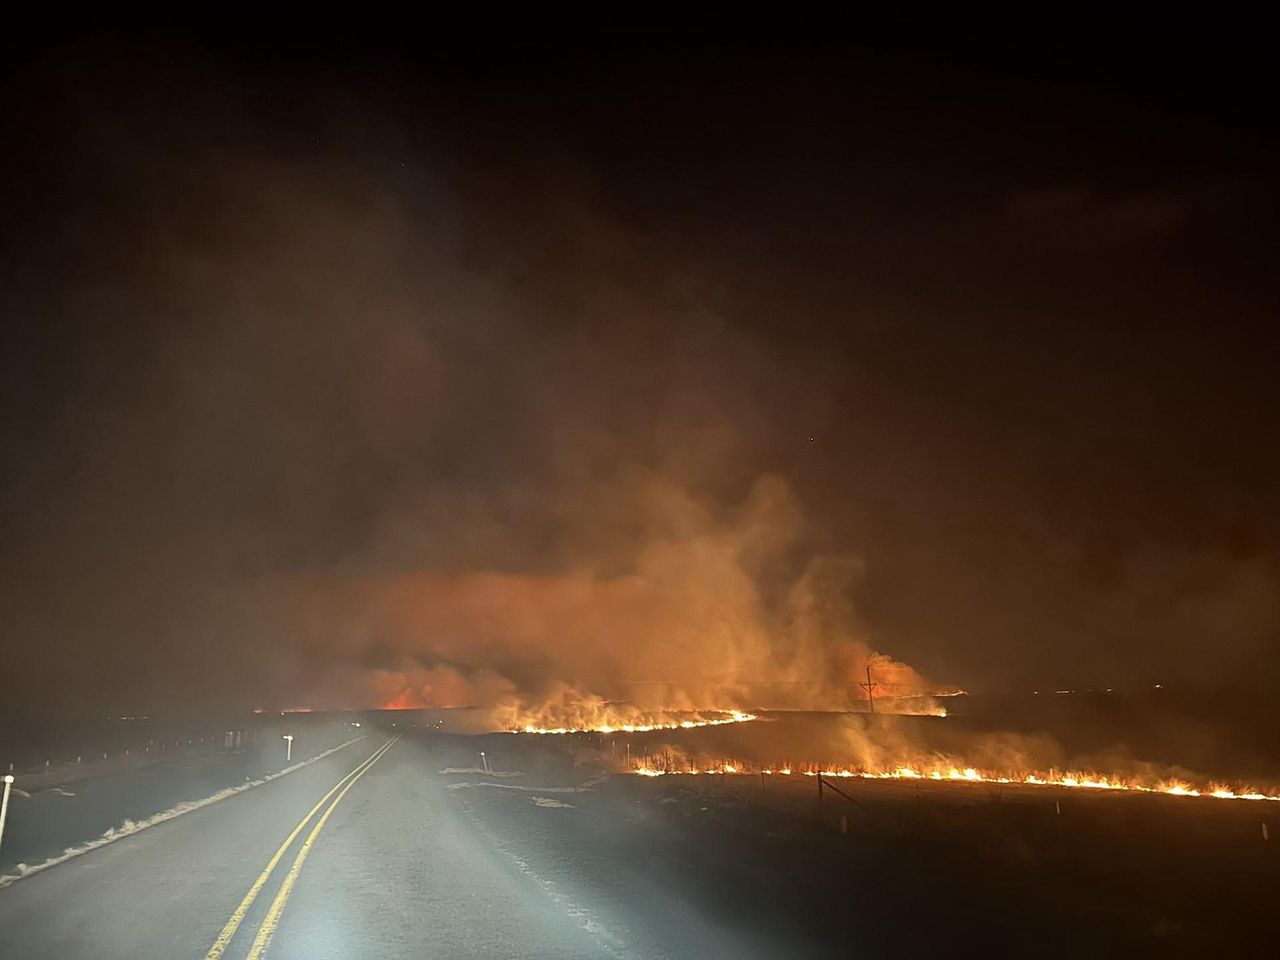 TEXAS PANHANDLE - FEBRUARY 27:  In this handout photo provided by the Texas A&M Forest Service, fire crosses a road in the Smokehouse Creek fire on the evening of February 27, 2024 in the Texas panhandle. The blaze has grown to more than 850,000 acres since igniting Monday, making it the second largest wildfire in Texas state history.  (Photo by Texas A&M Forest Service via Getty Images)